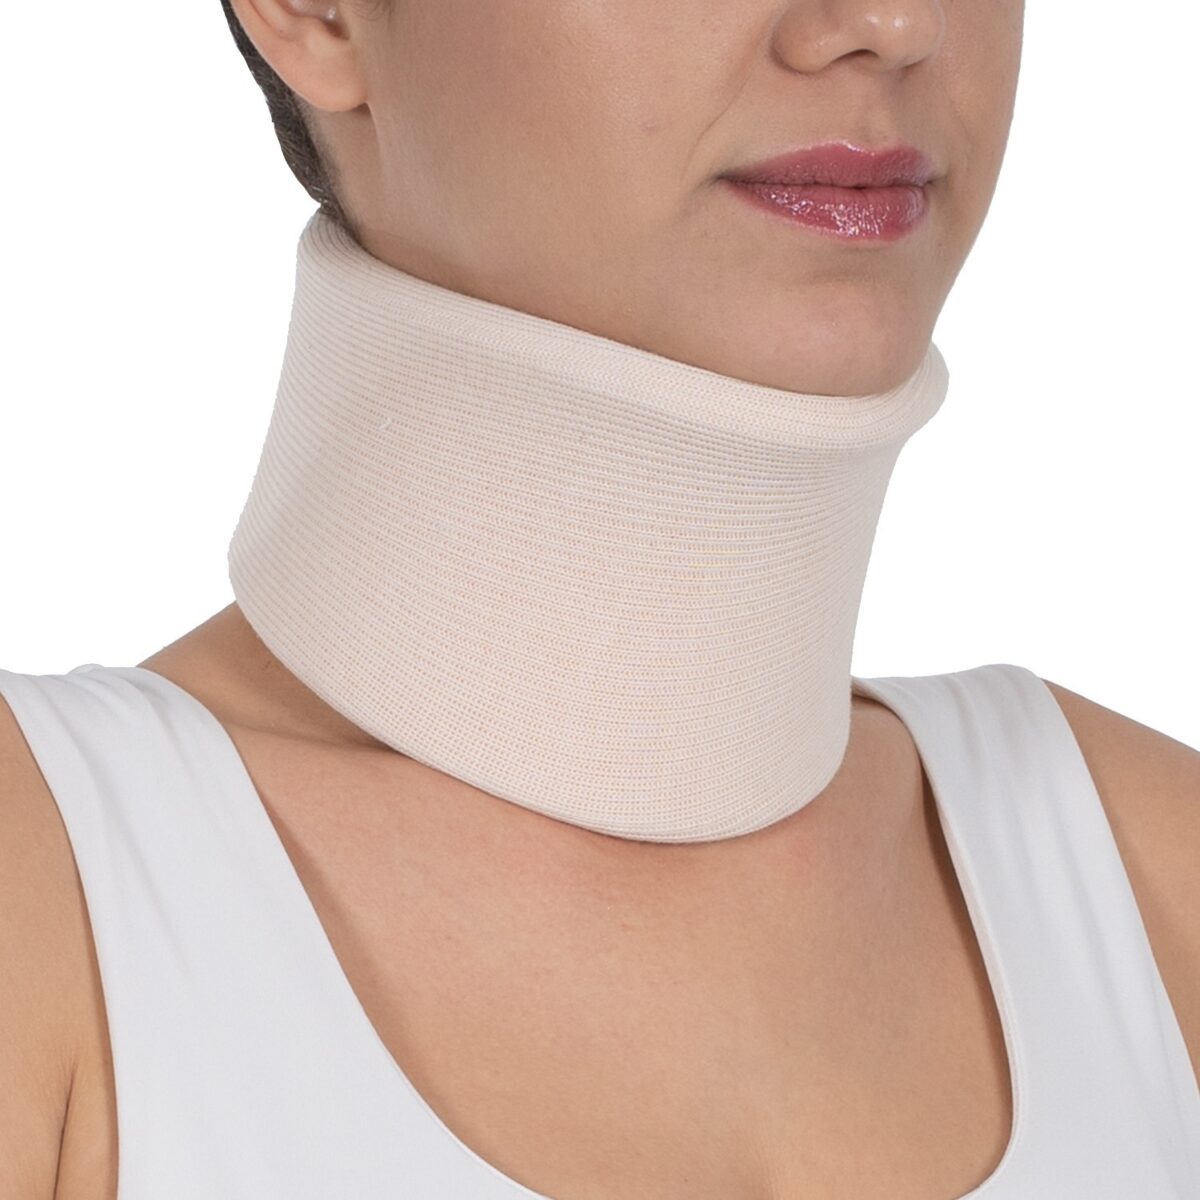 wingmed orthopedic equipments W104 nelson collar fabric coated product 1 1